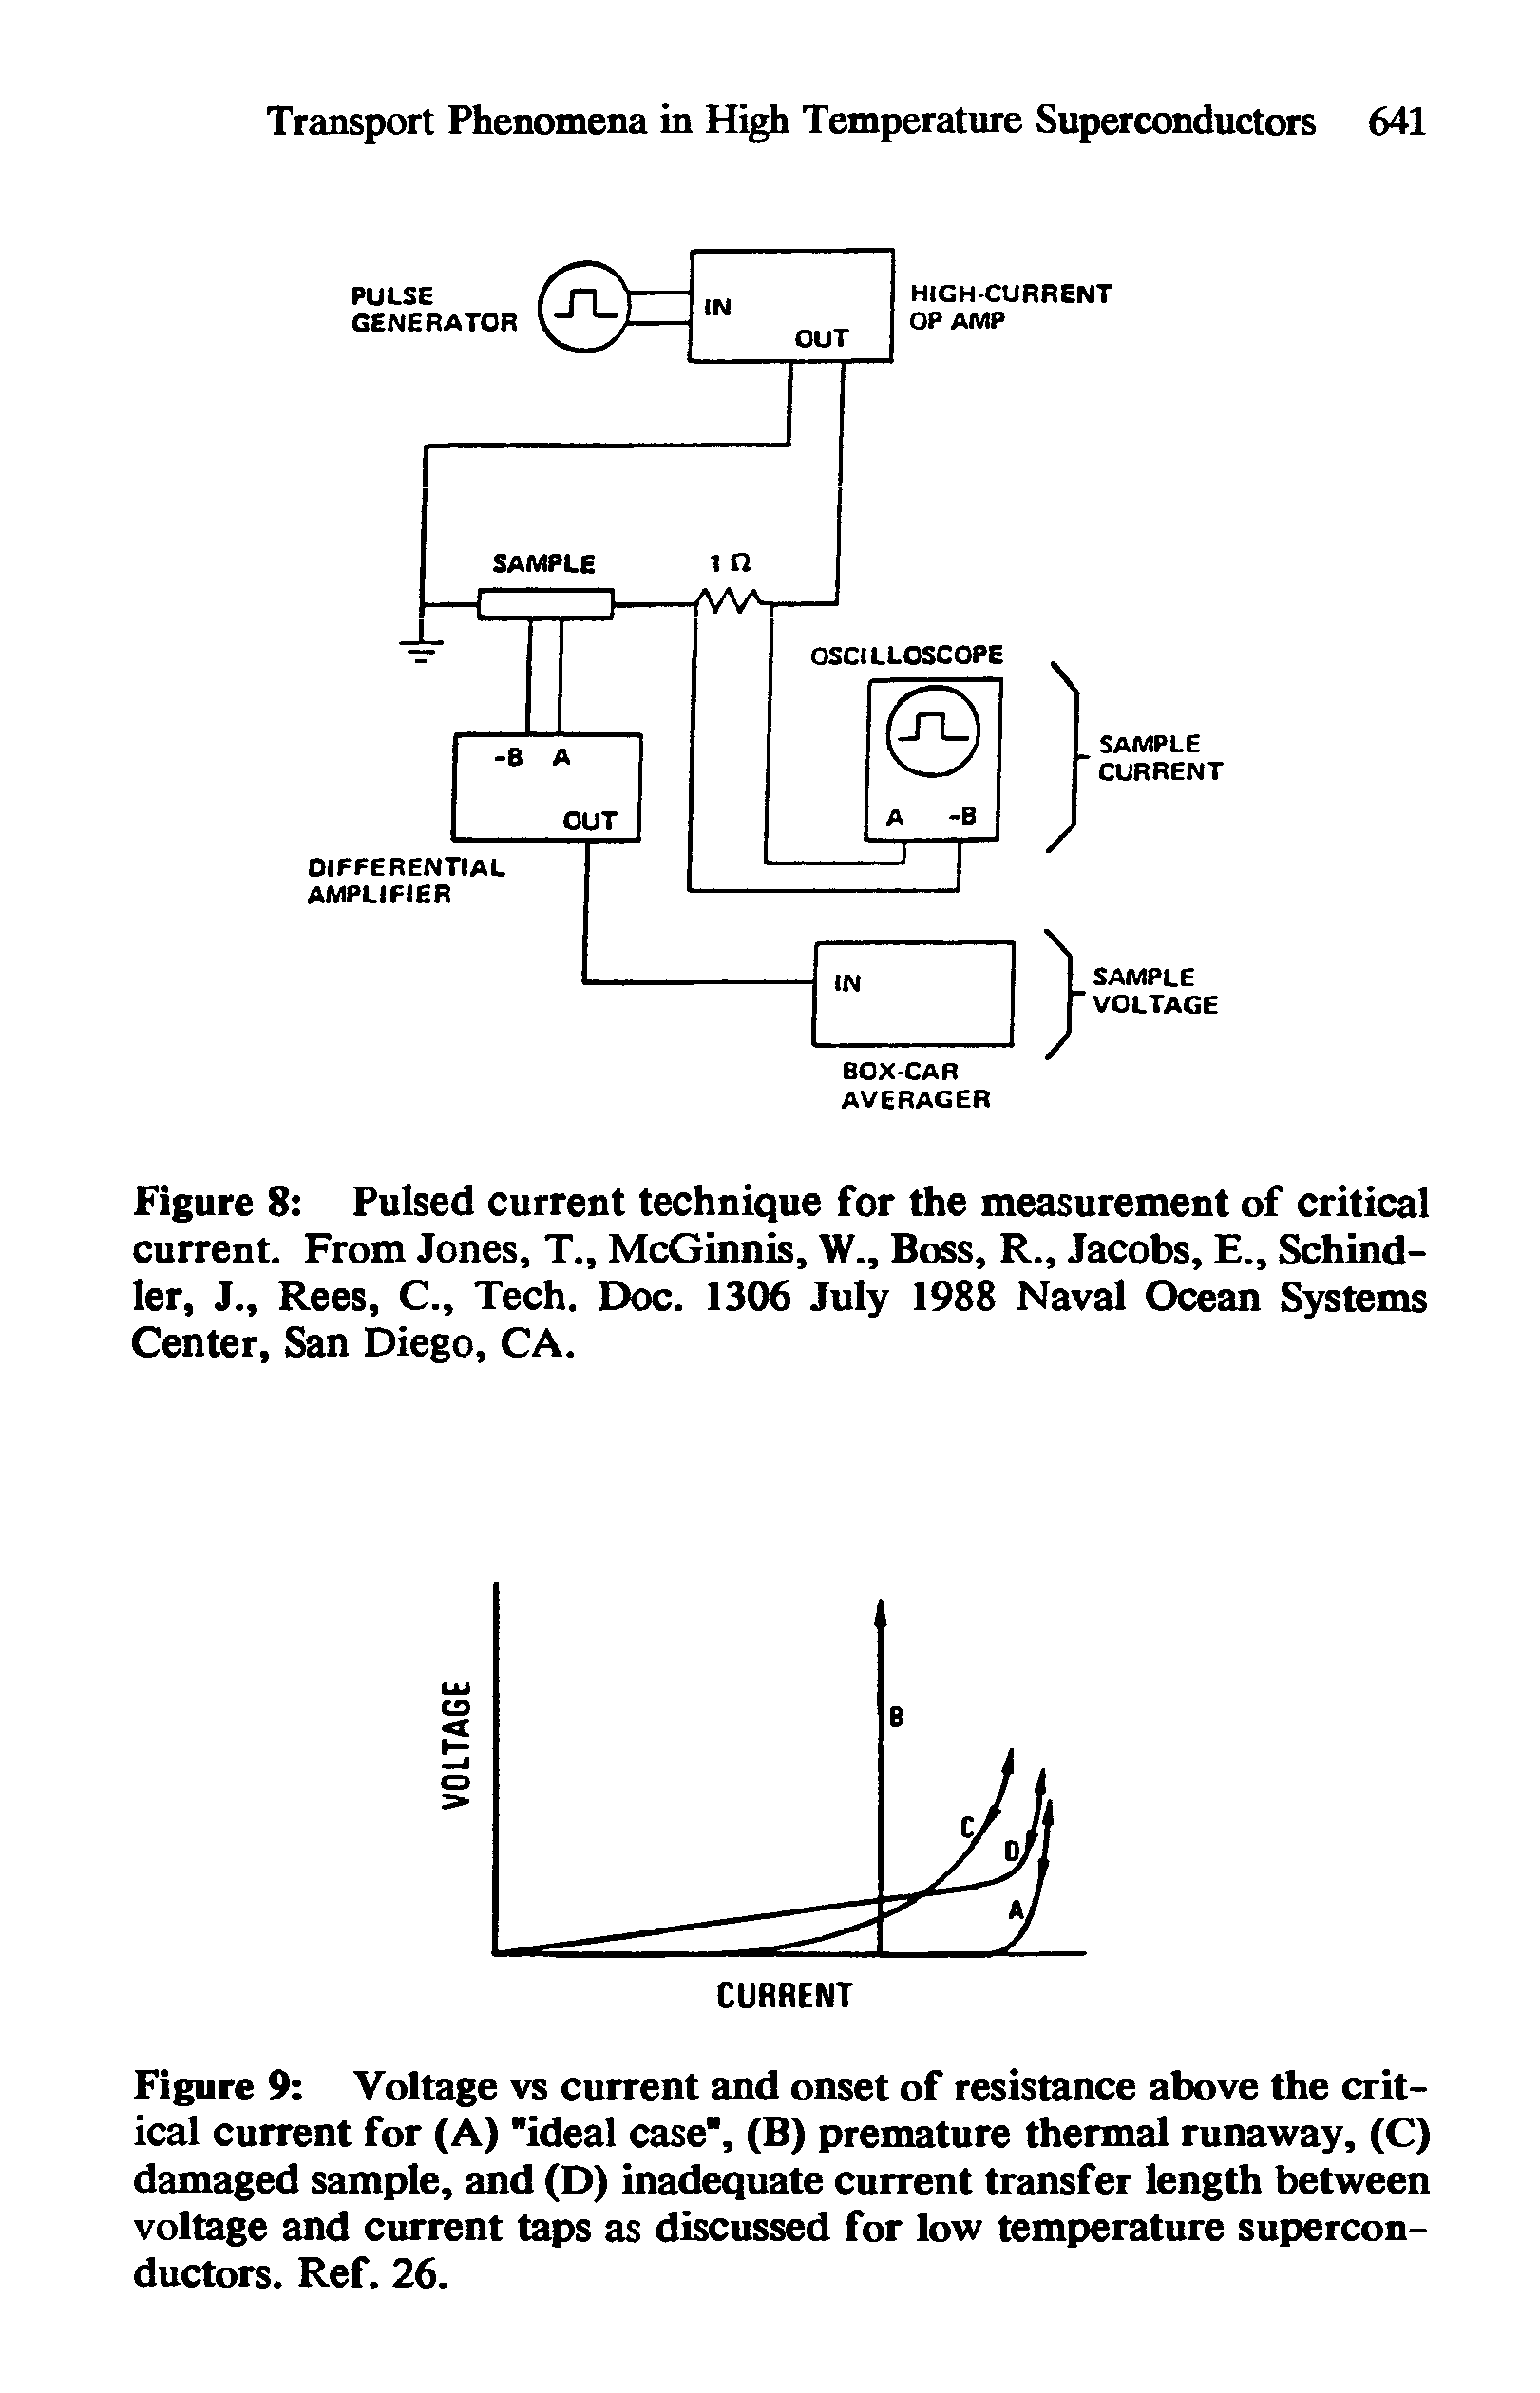 Figure 8 Pulsed current technique for the measurement of critical current. From Jones, T., McGinnis, W., Boss, R., Jacobs, E., Schindler, J., Rees, C., Tech. Doc. 1306 July 1988 Naval Ocean Systems Center, San Diego, CA.